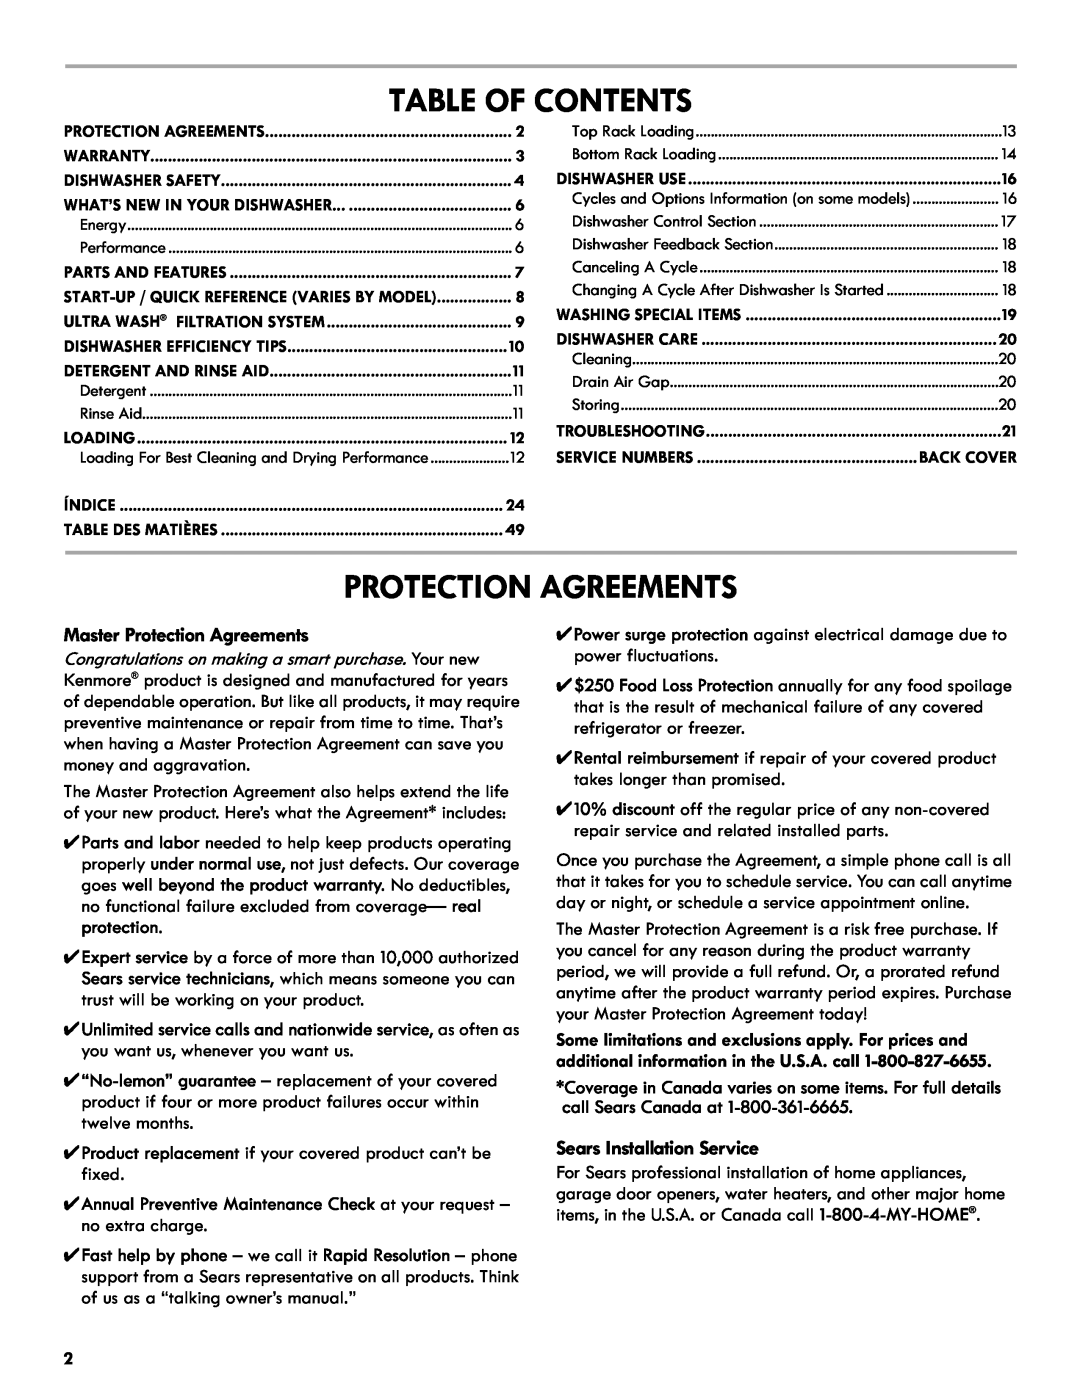 Kenmore 665.1301 manual Table Of Contents, Master Protection Agreements, Sears Installation Service 